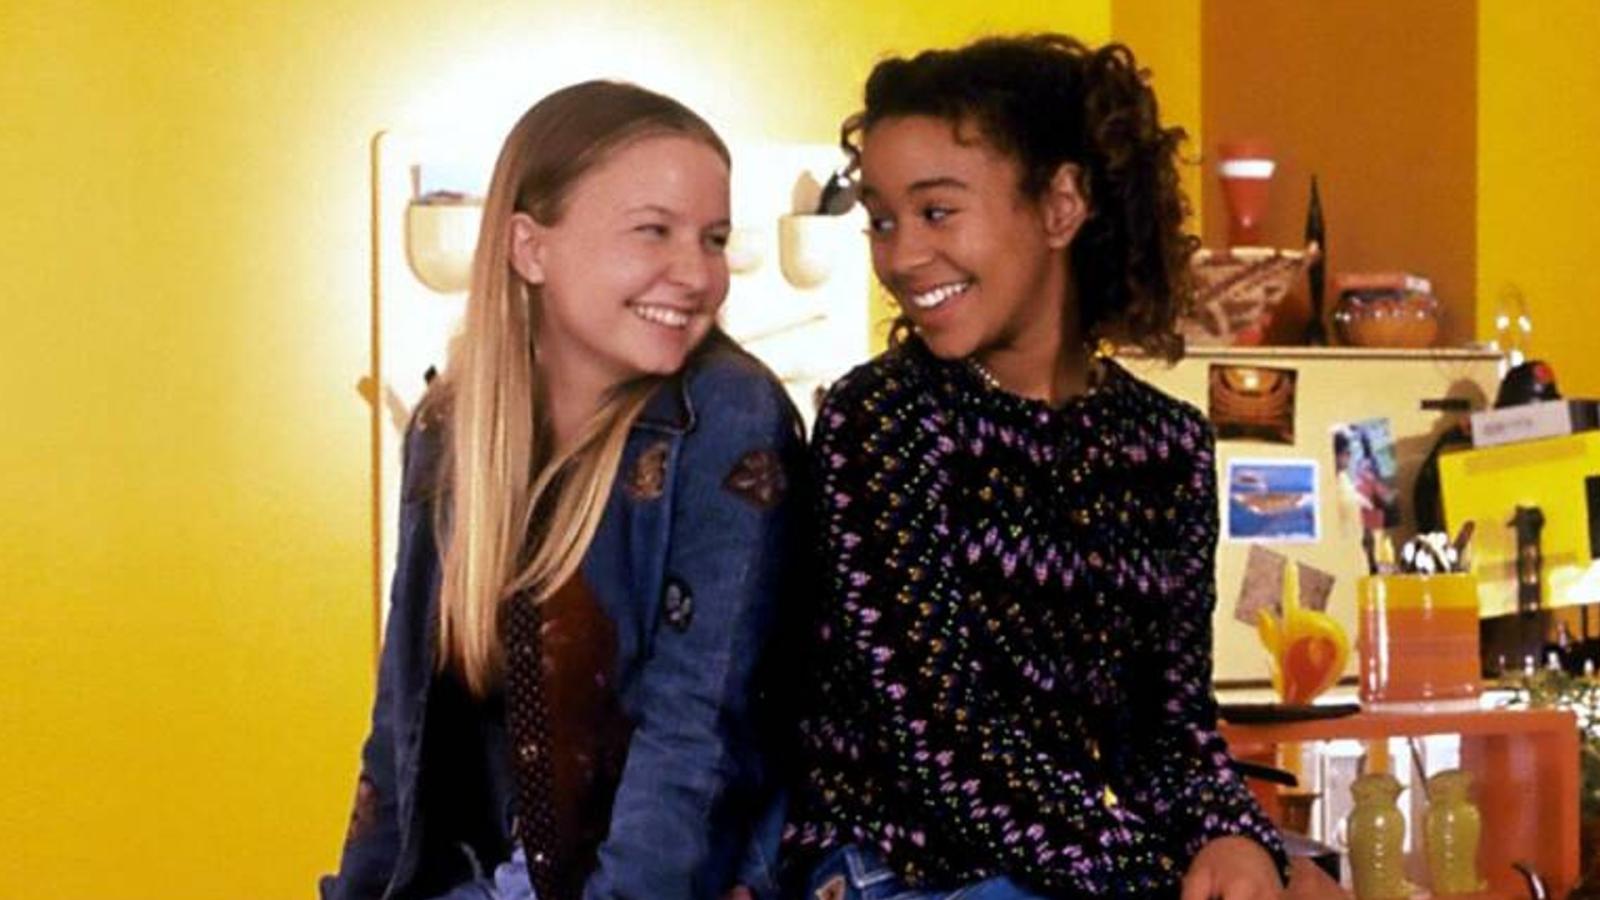 15 Wholesome Disney Channel Movies Surprisingly Watchable For Adults, Too - image 5